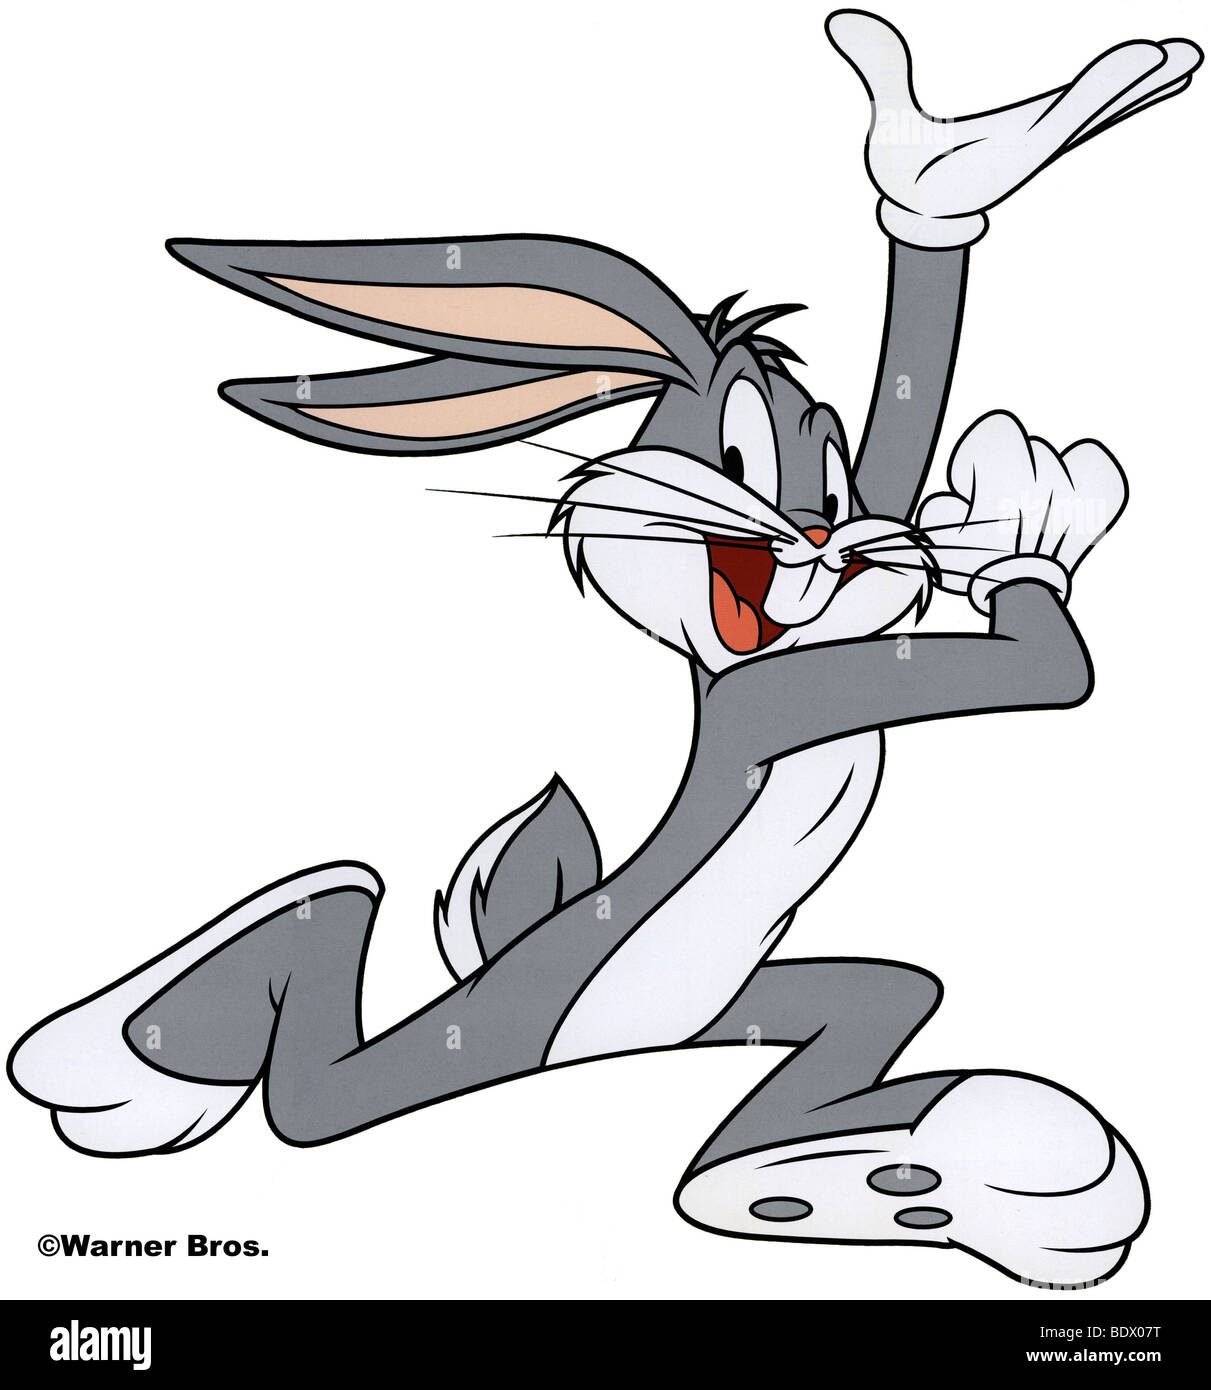 Bugs Bunny Cartoon High Resolution Stock Photography and Images - Alamy